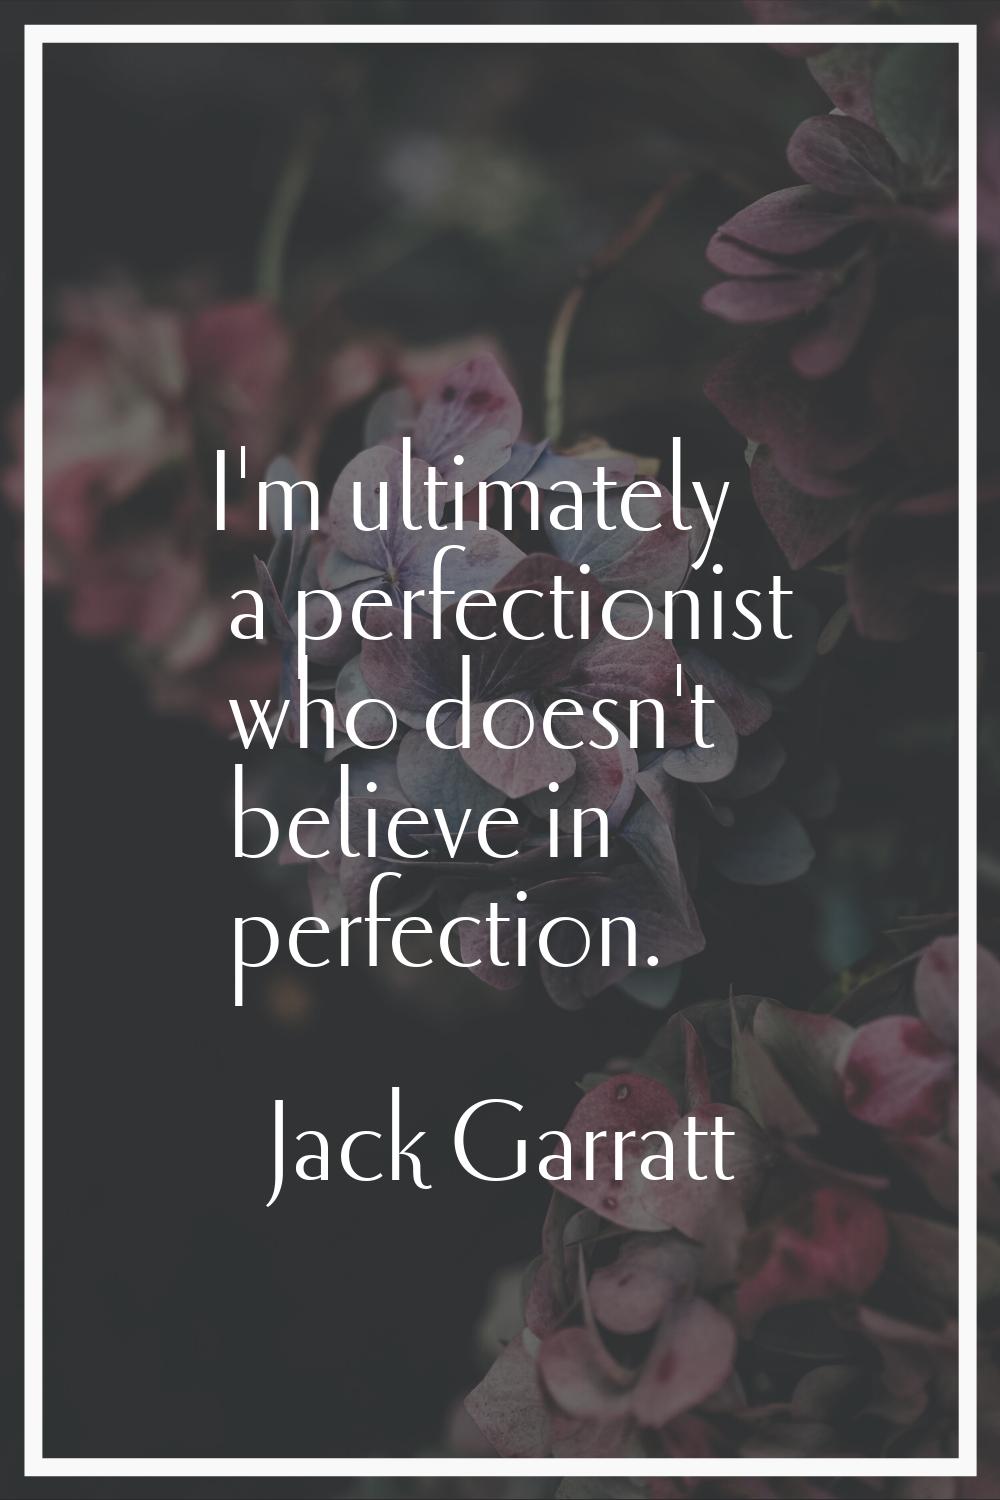 I'm ultimately a perfectionist who doesn't believe in perfection.